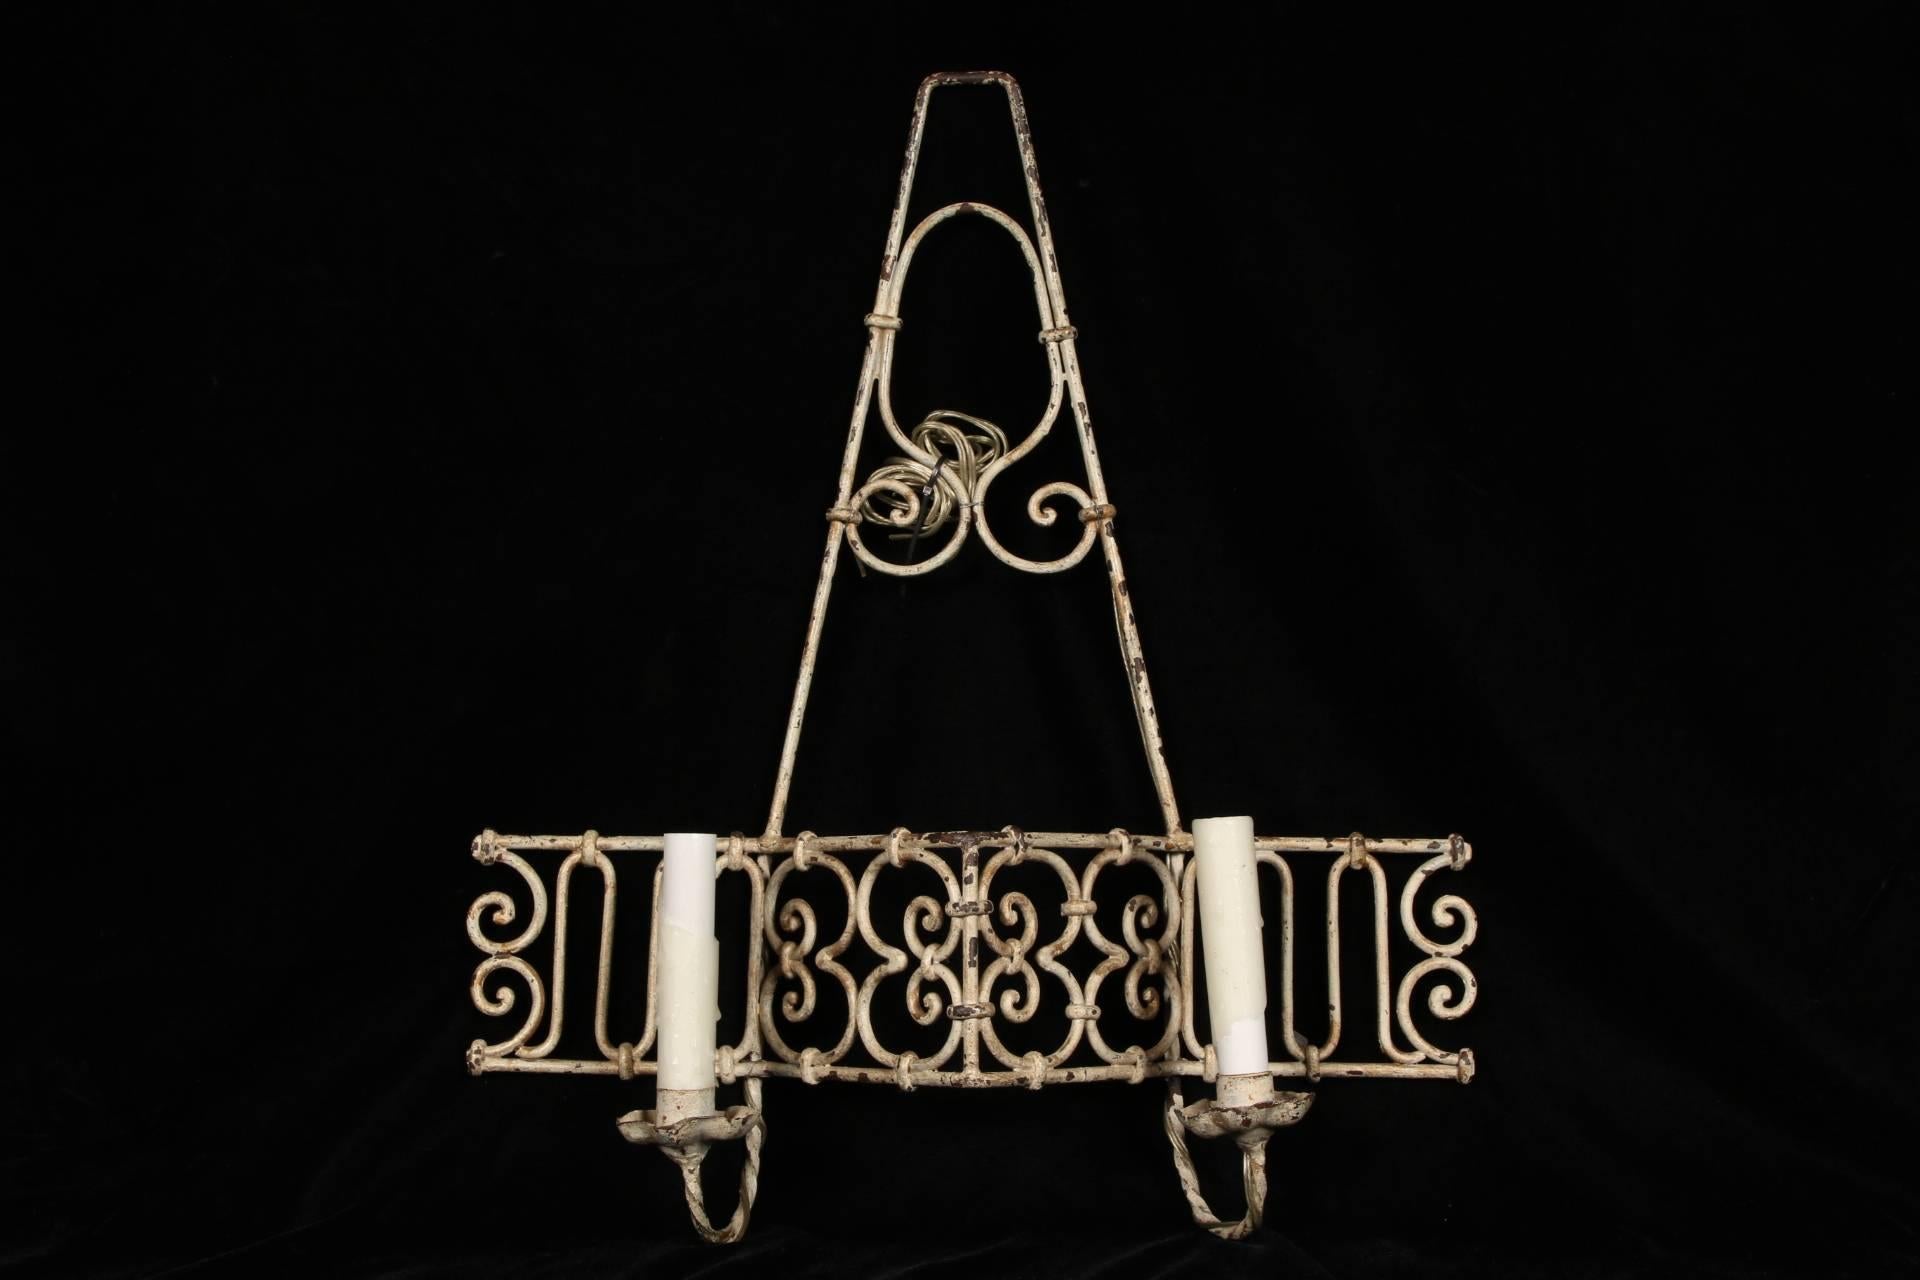 Rustic Pair of Hand-Wrought Iron Sconces